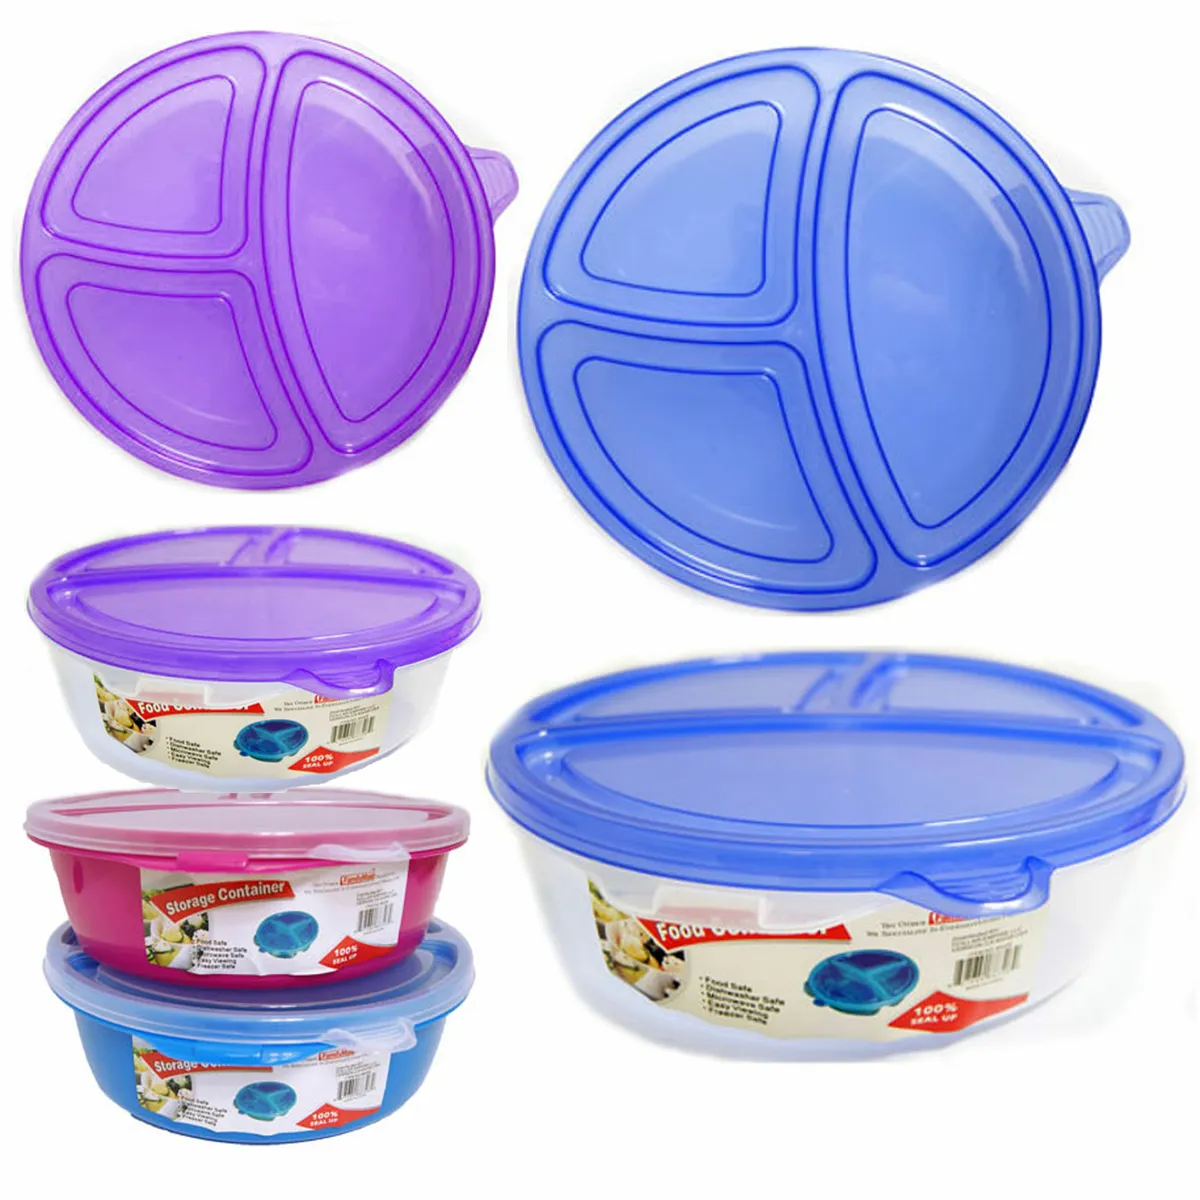 3 Large Microwave Food Storage Containers Section Divided Plates w/ Lids Cover